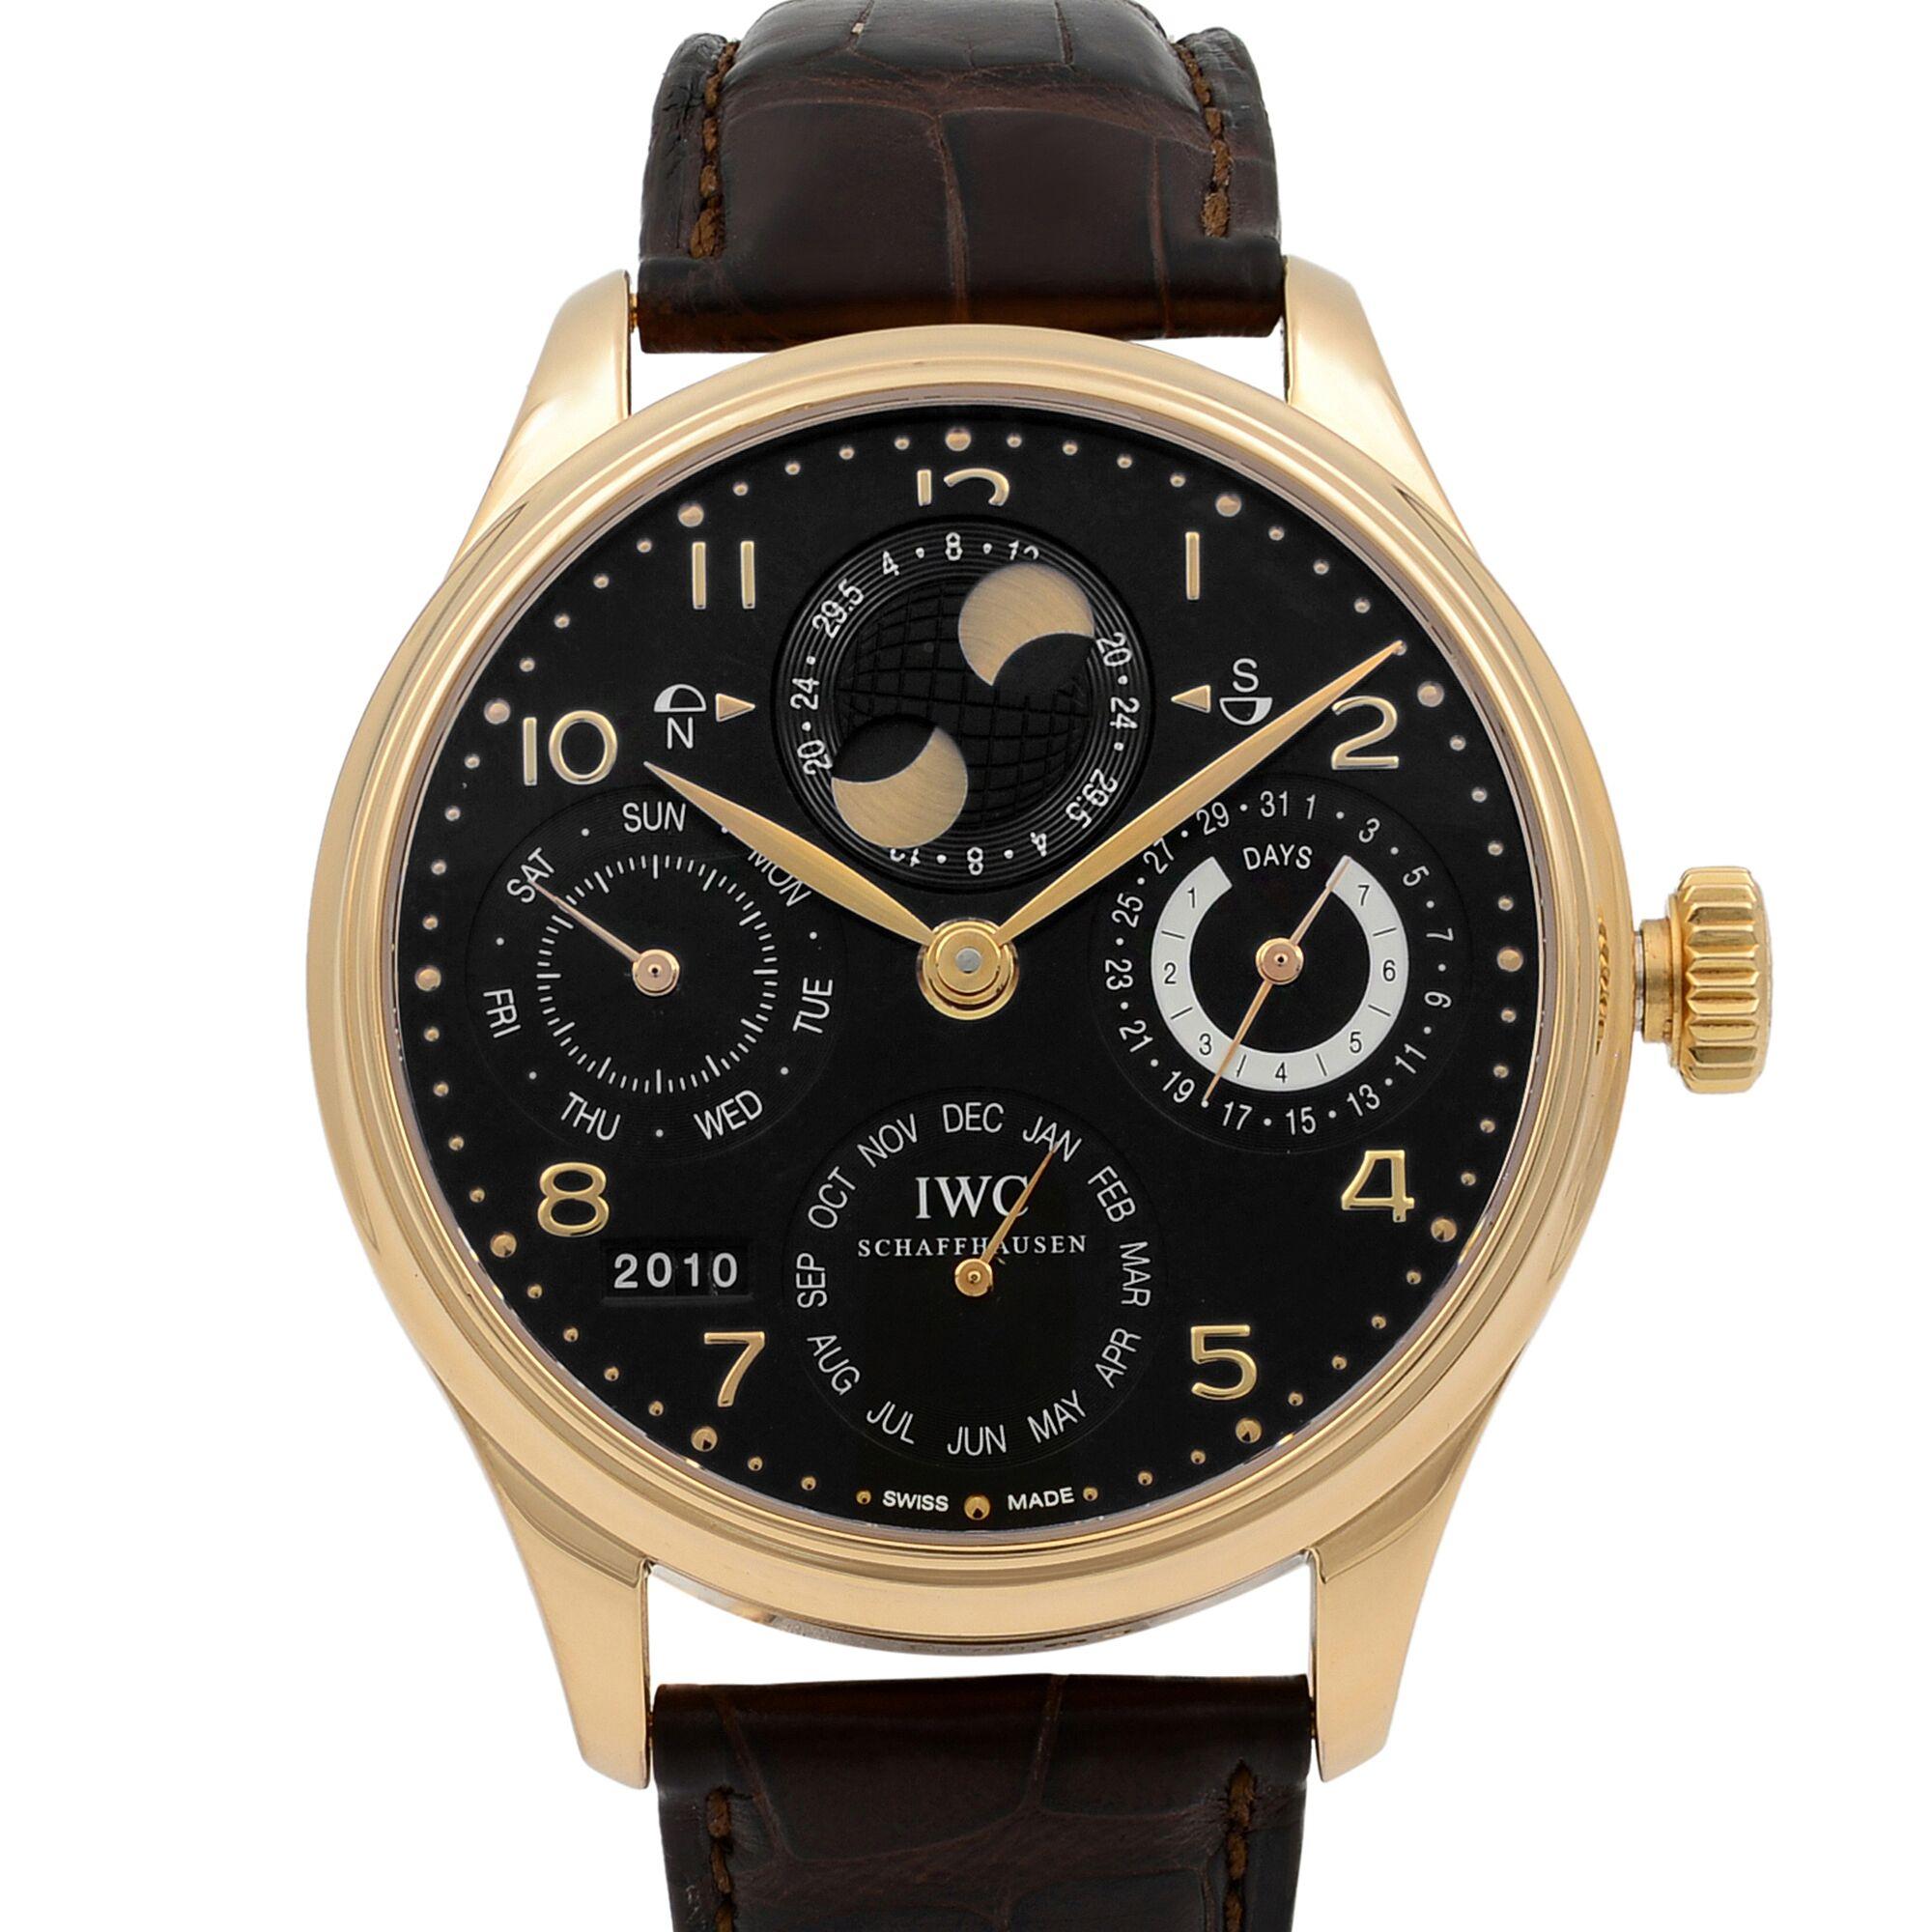 This pre-owned IWC Portugieser IW503202 is a beautiful men's timepiece that is powered by a mechanical (automatic) movement which is cased in a rose gold case. It has a round shape face, day & date, moon phase dial, and has hand Arabic numerals